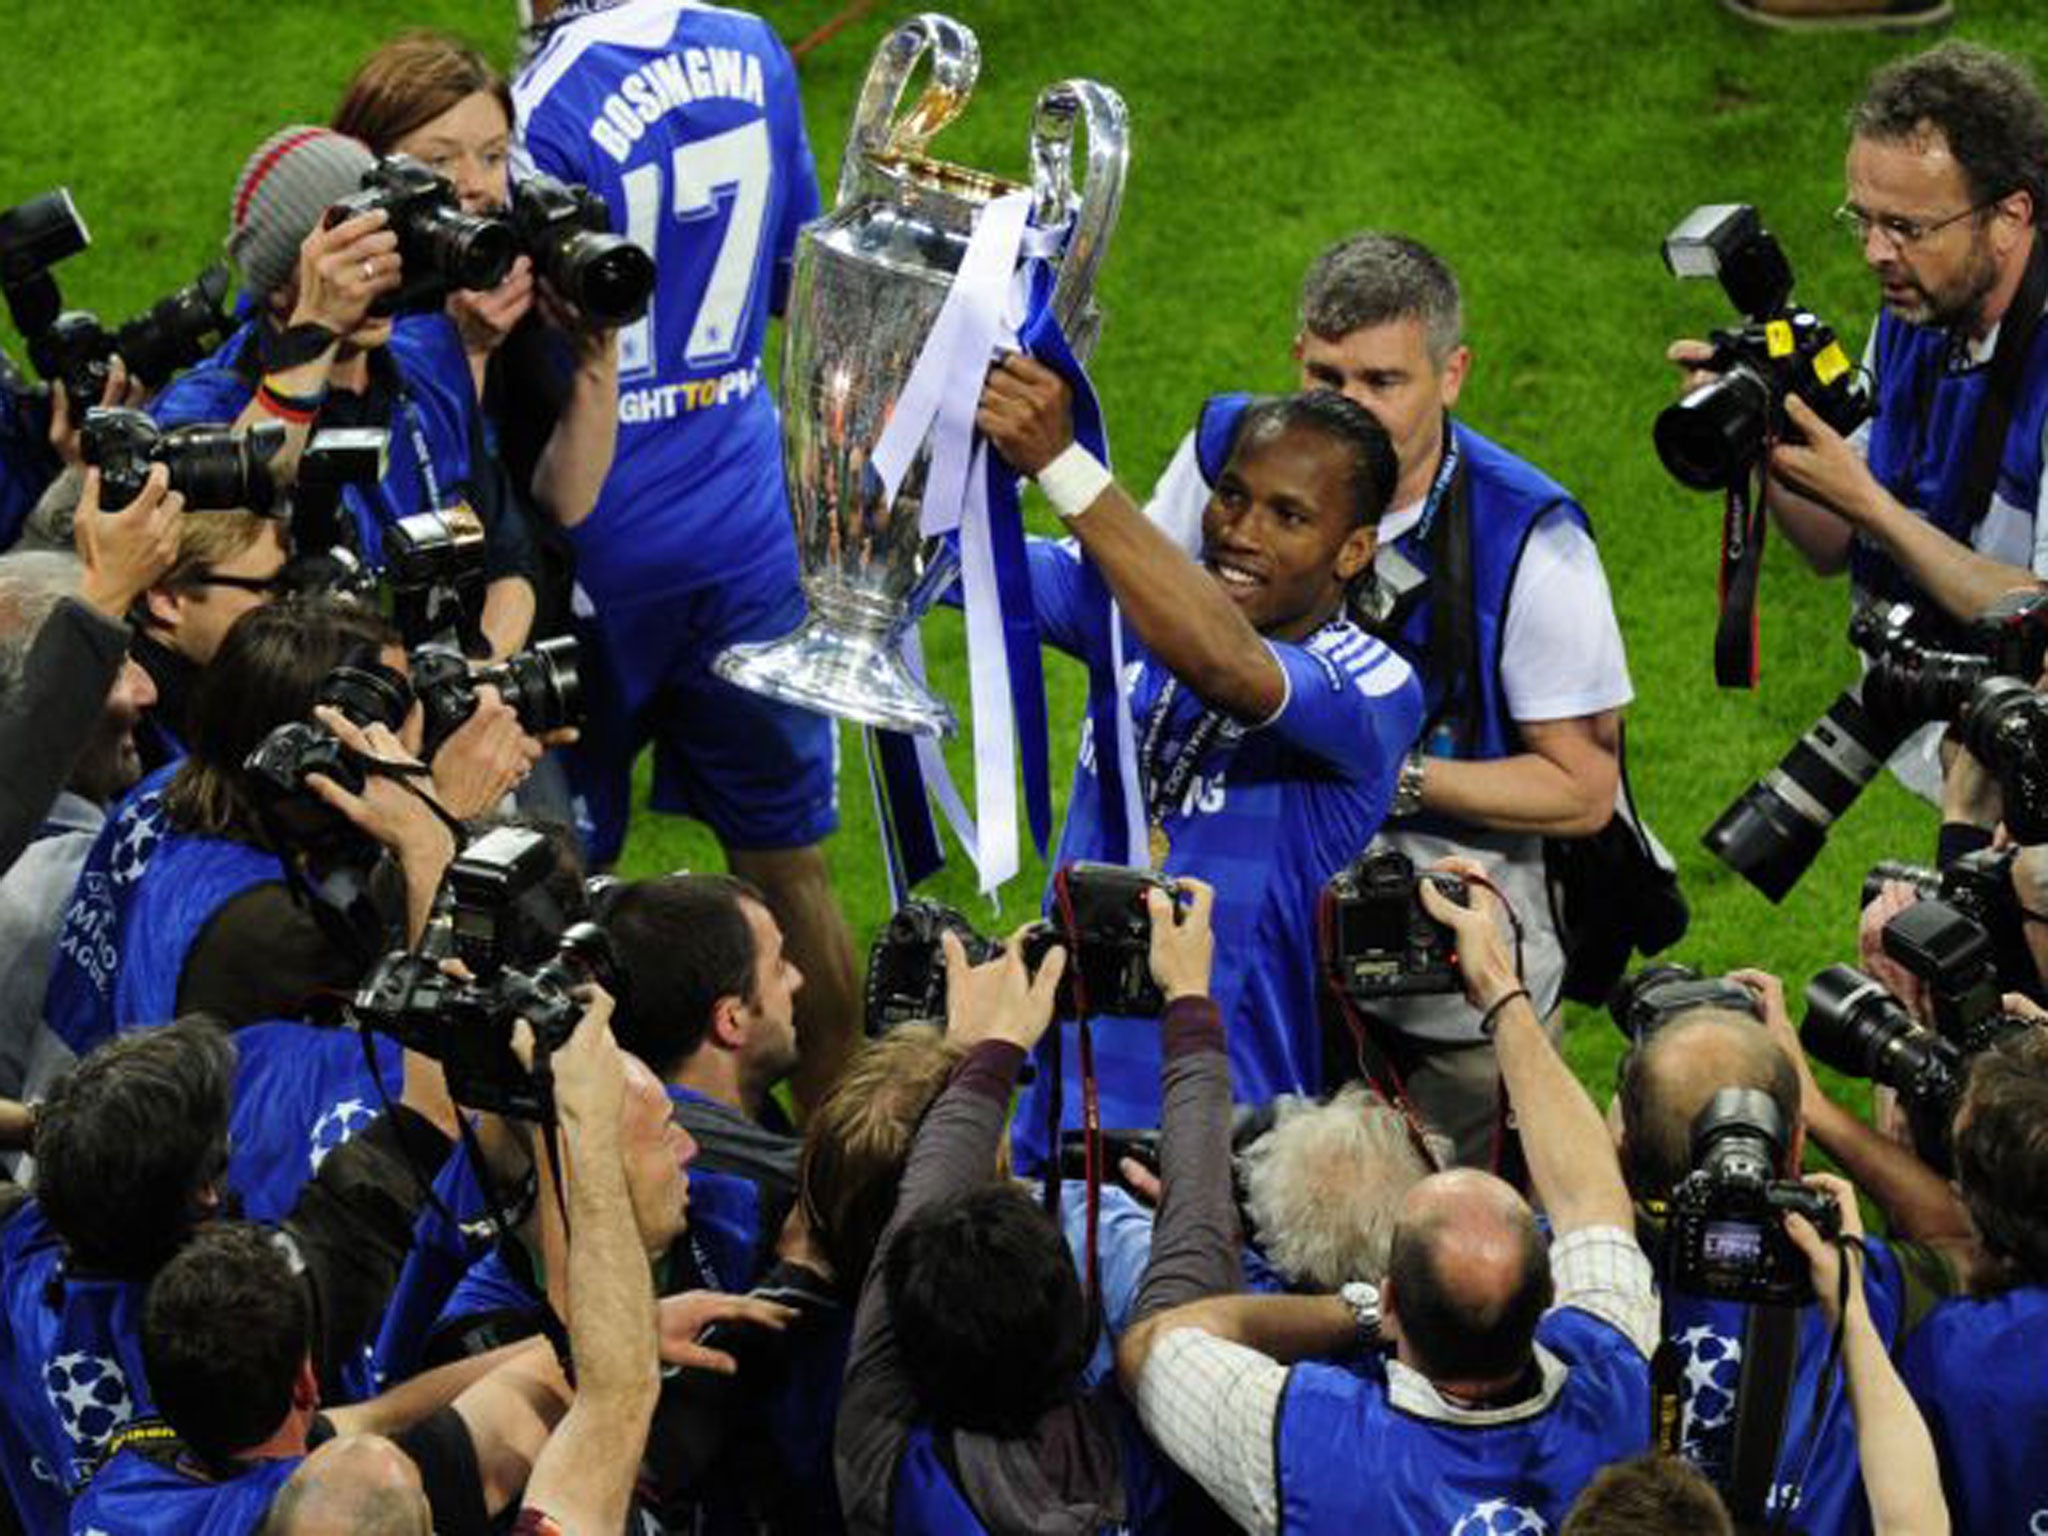 Didier Drogba holds aloft the European Cup after Chelsea’s triumph in 2012